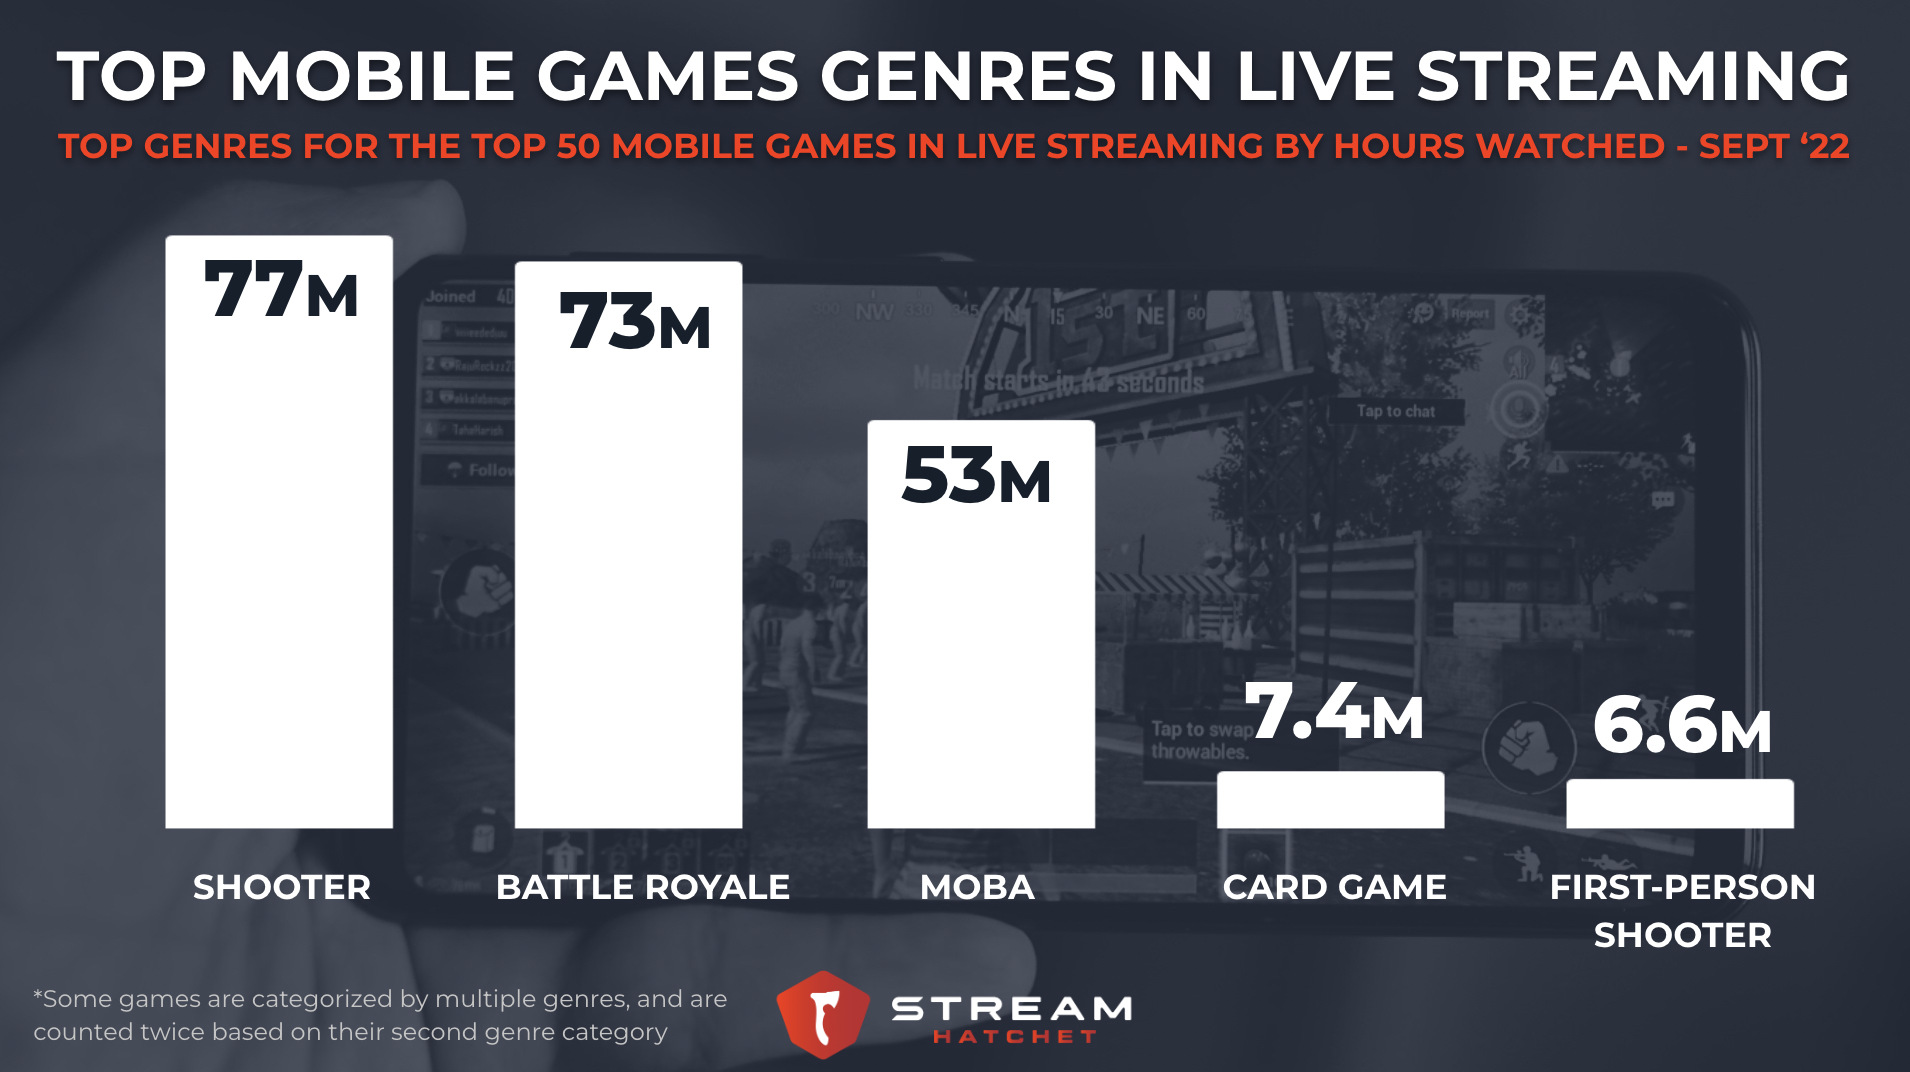 League Of Legends Is The World's Most Played Game With 32 Million+